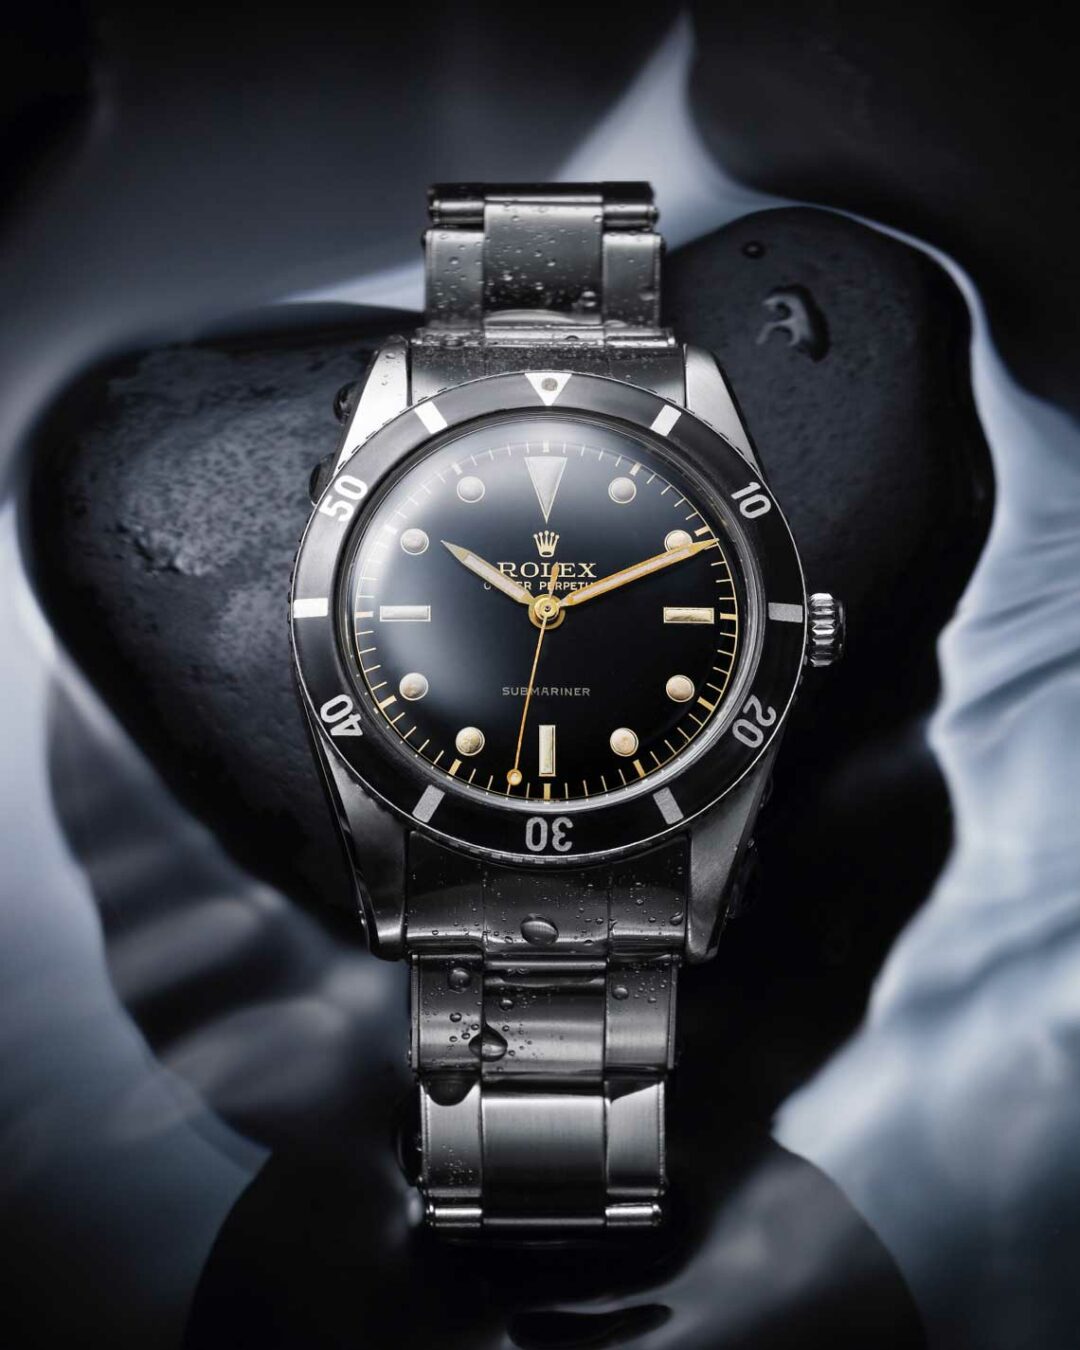 Rolex-The-Reference-Among-Divers-Watches-Image_1953_Premier-Submariner_6204_004